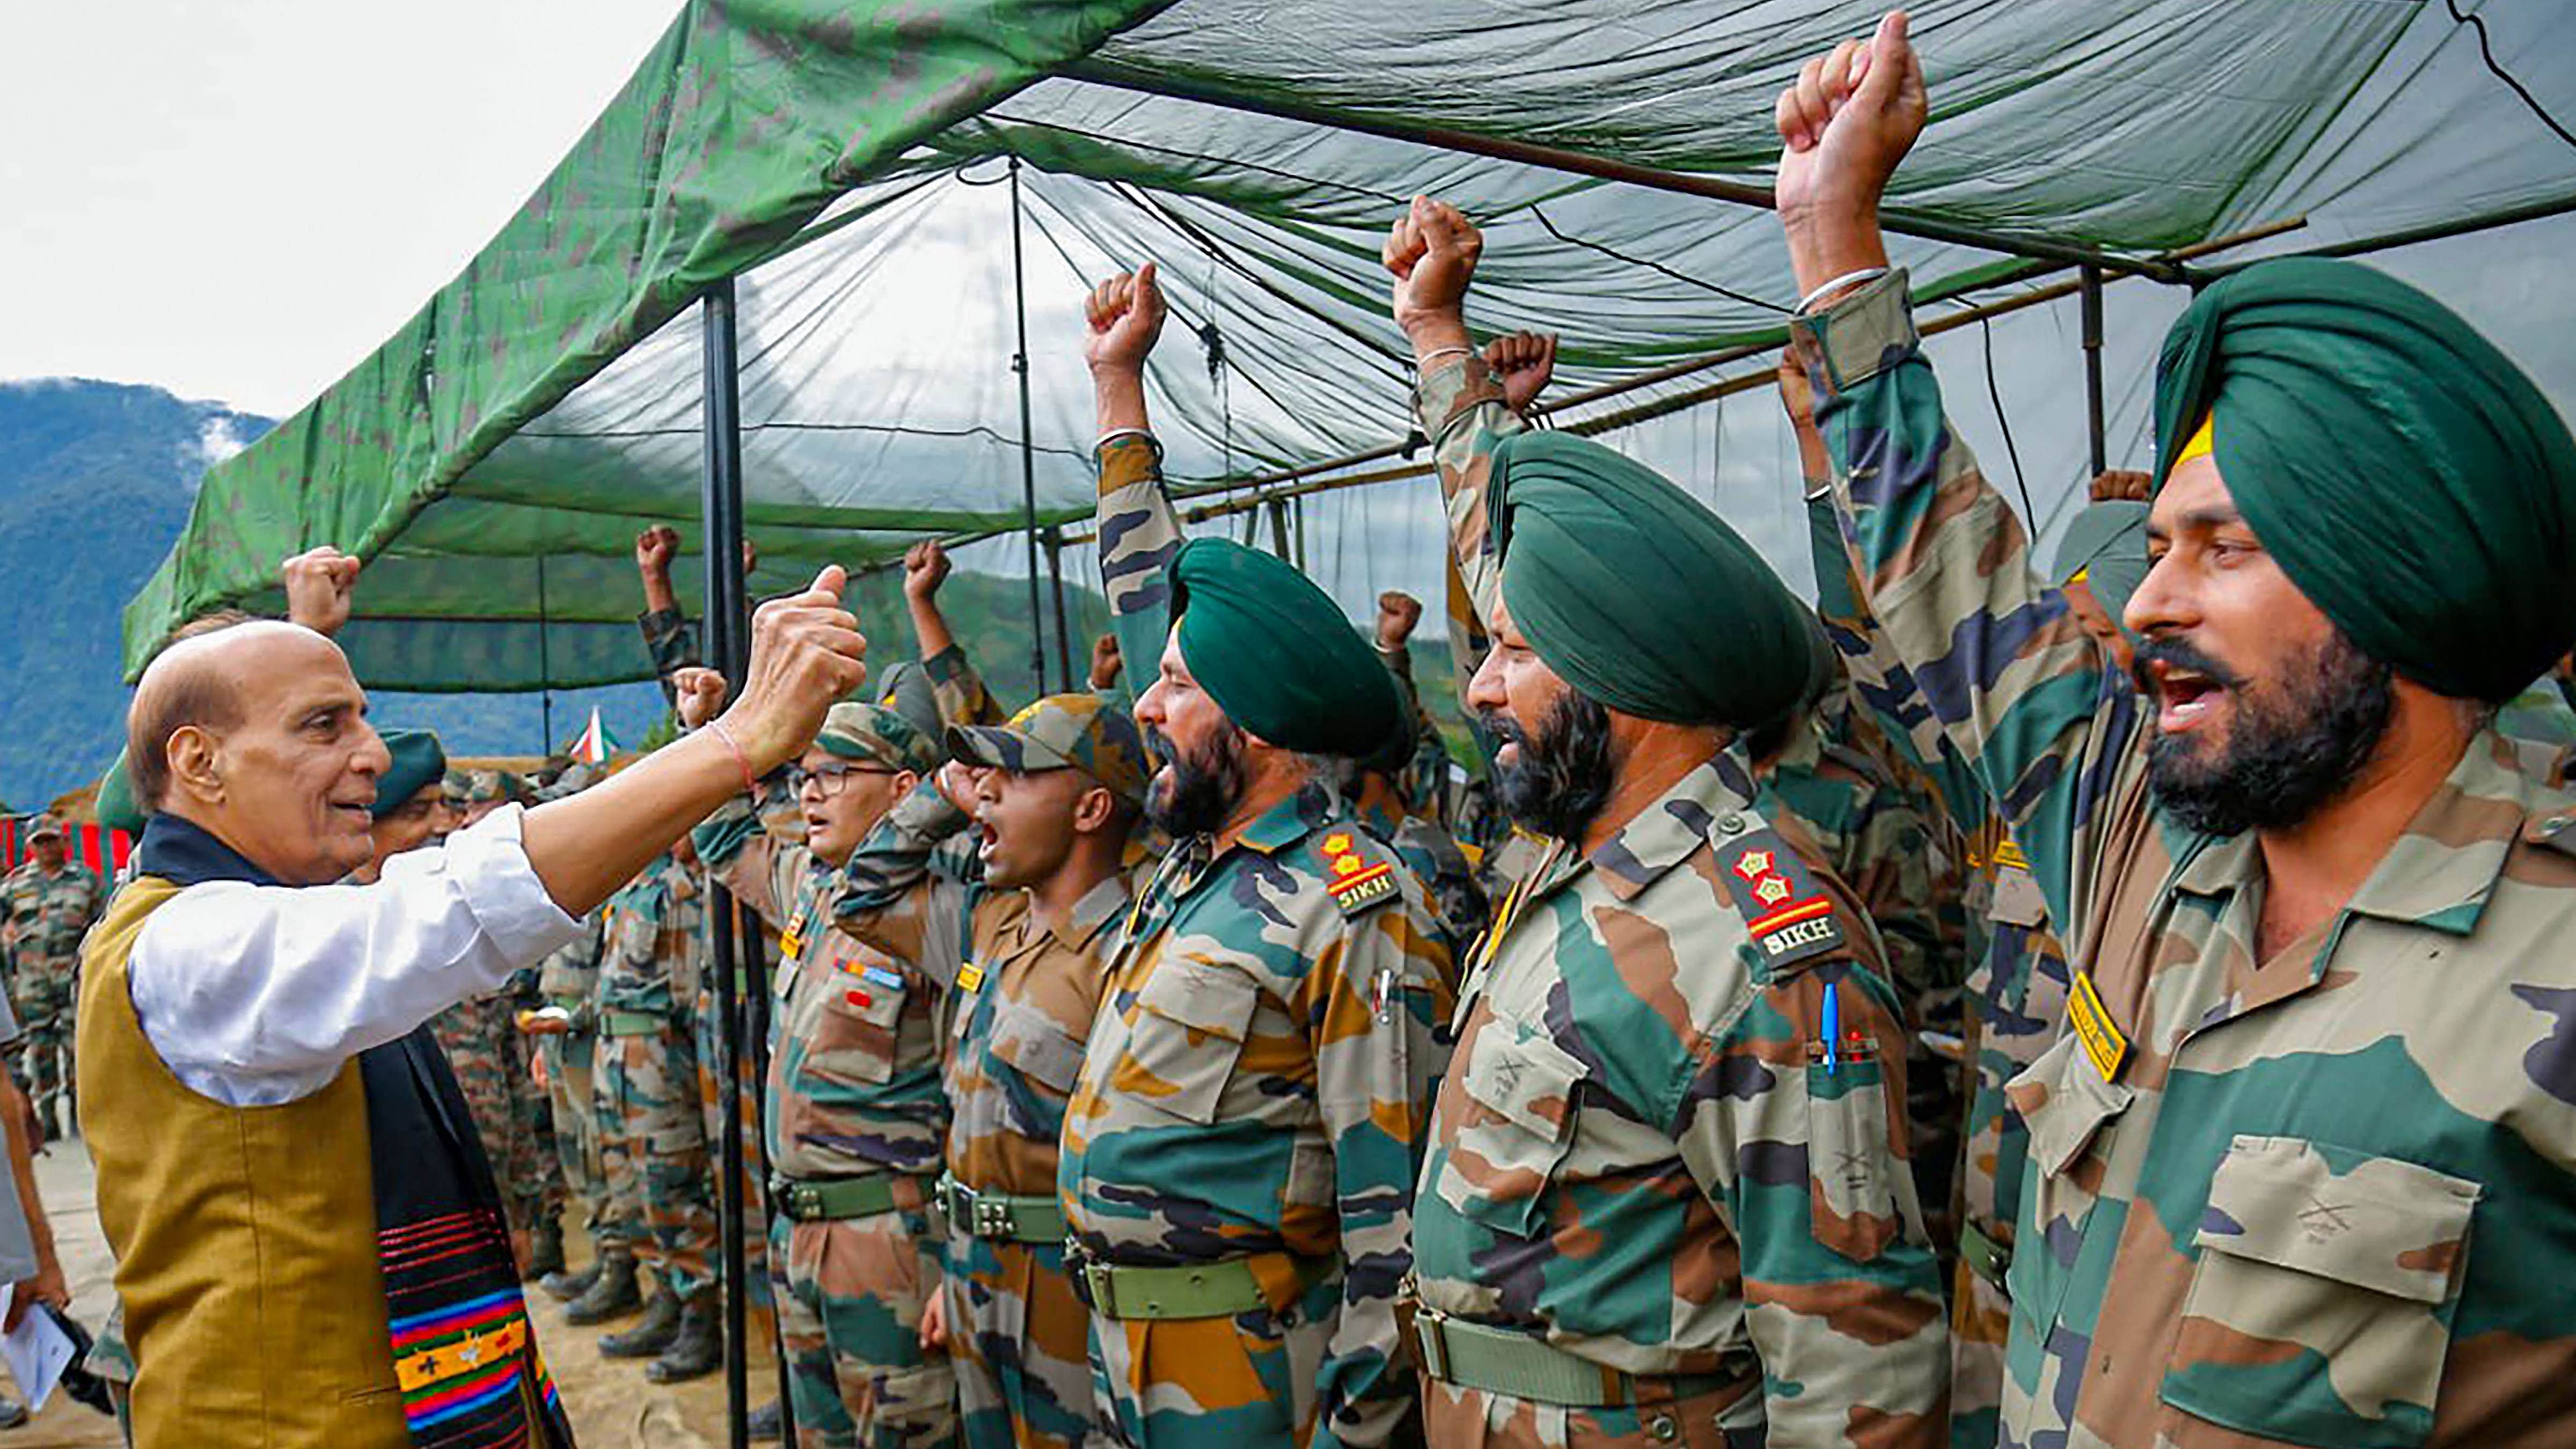 Rajnath Singh raises slogans with troops during his visit to forward areas in Dibang valley. Credit: PTI Photo